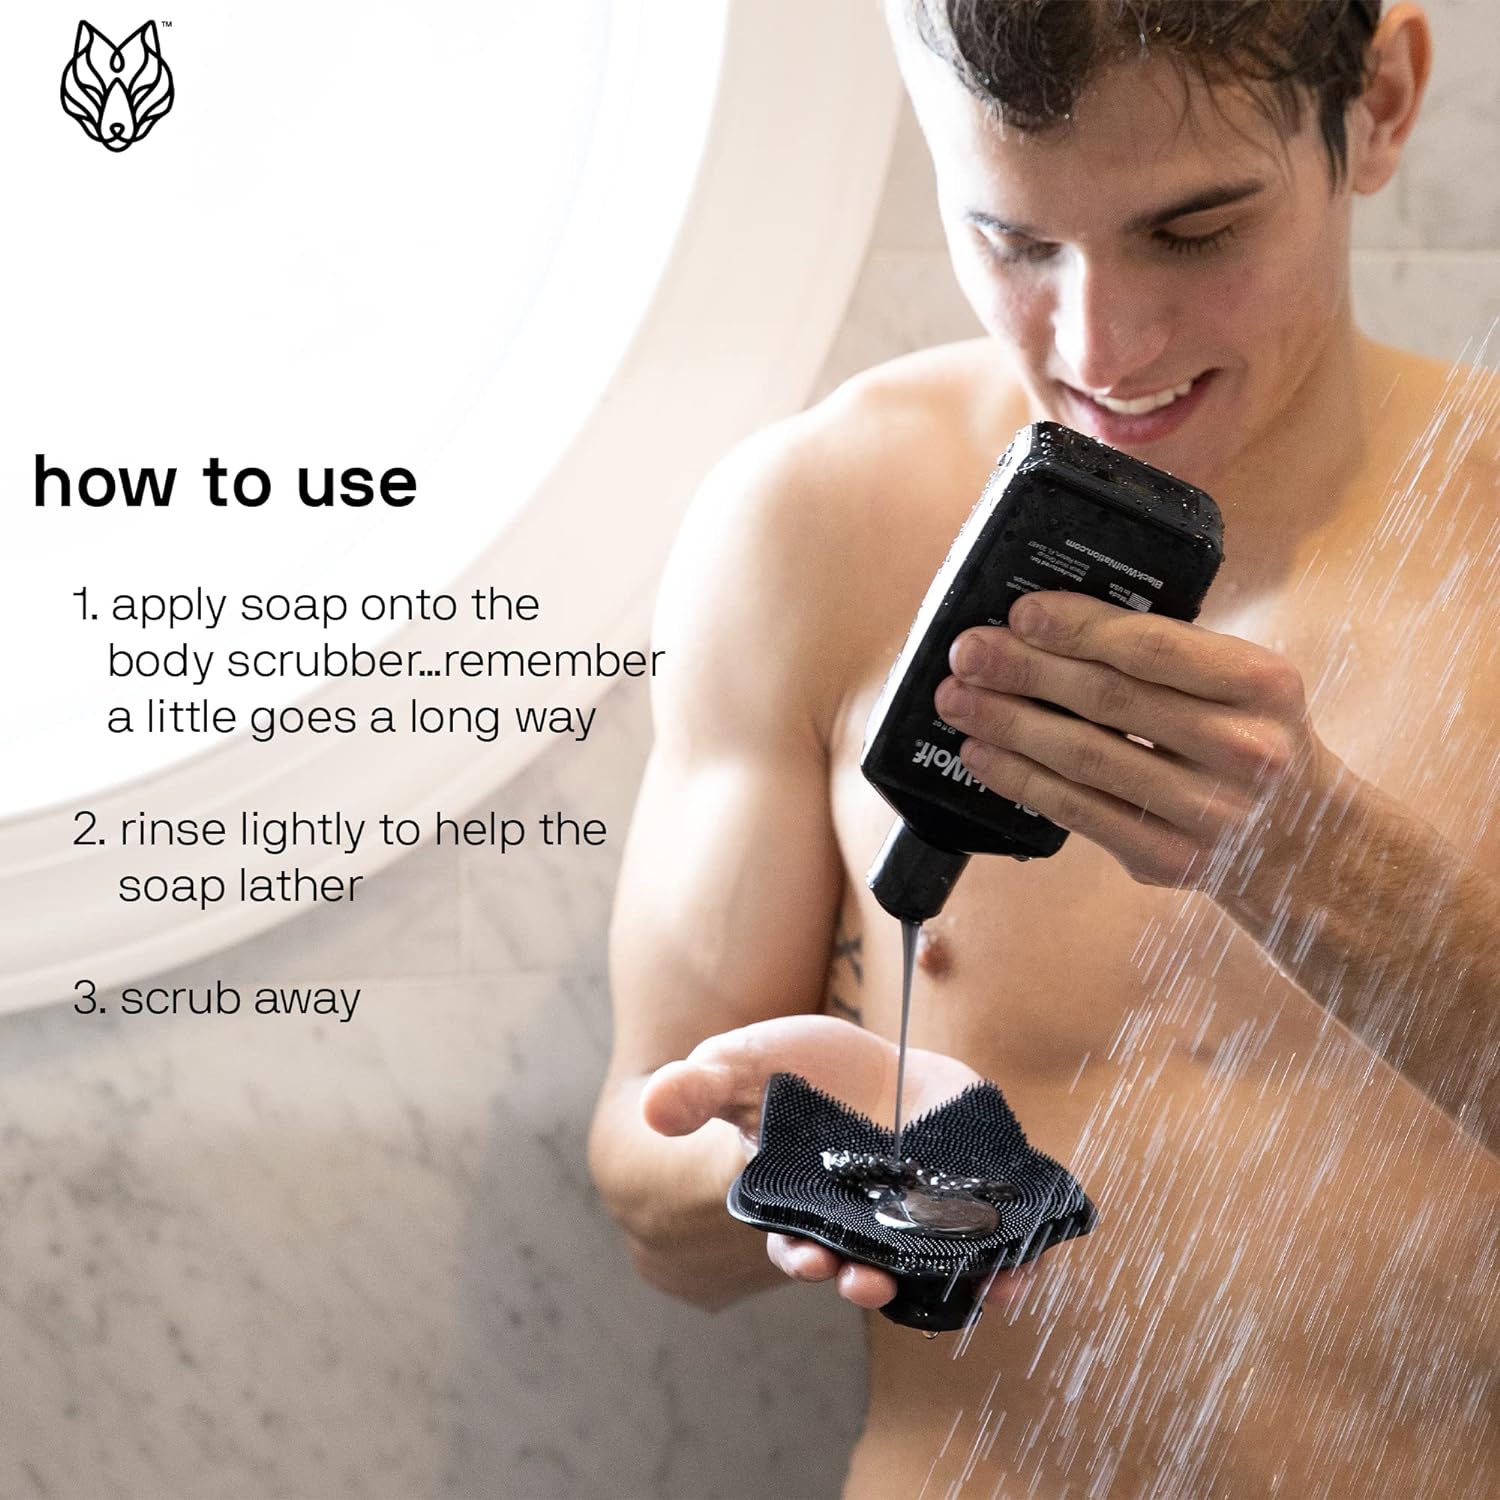 Black Wolf Body Scrubber - 100% Silicone Bristles for a Hygienic Deep Clean Experience - Easy to Clean Excess Soap and Body Wash Off : Beauty & Personal Care